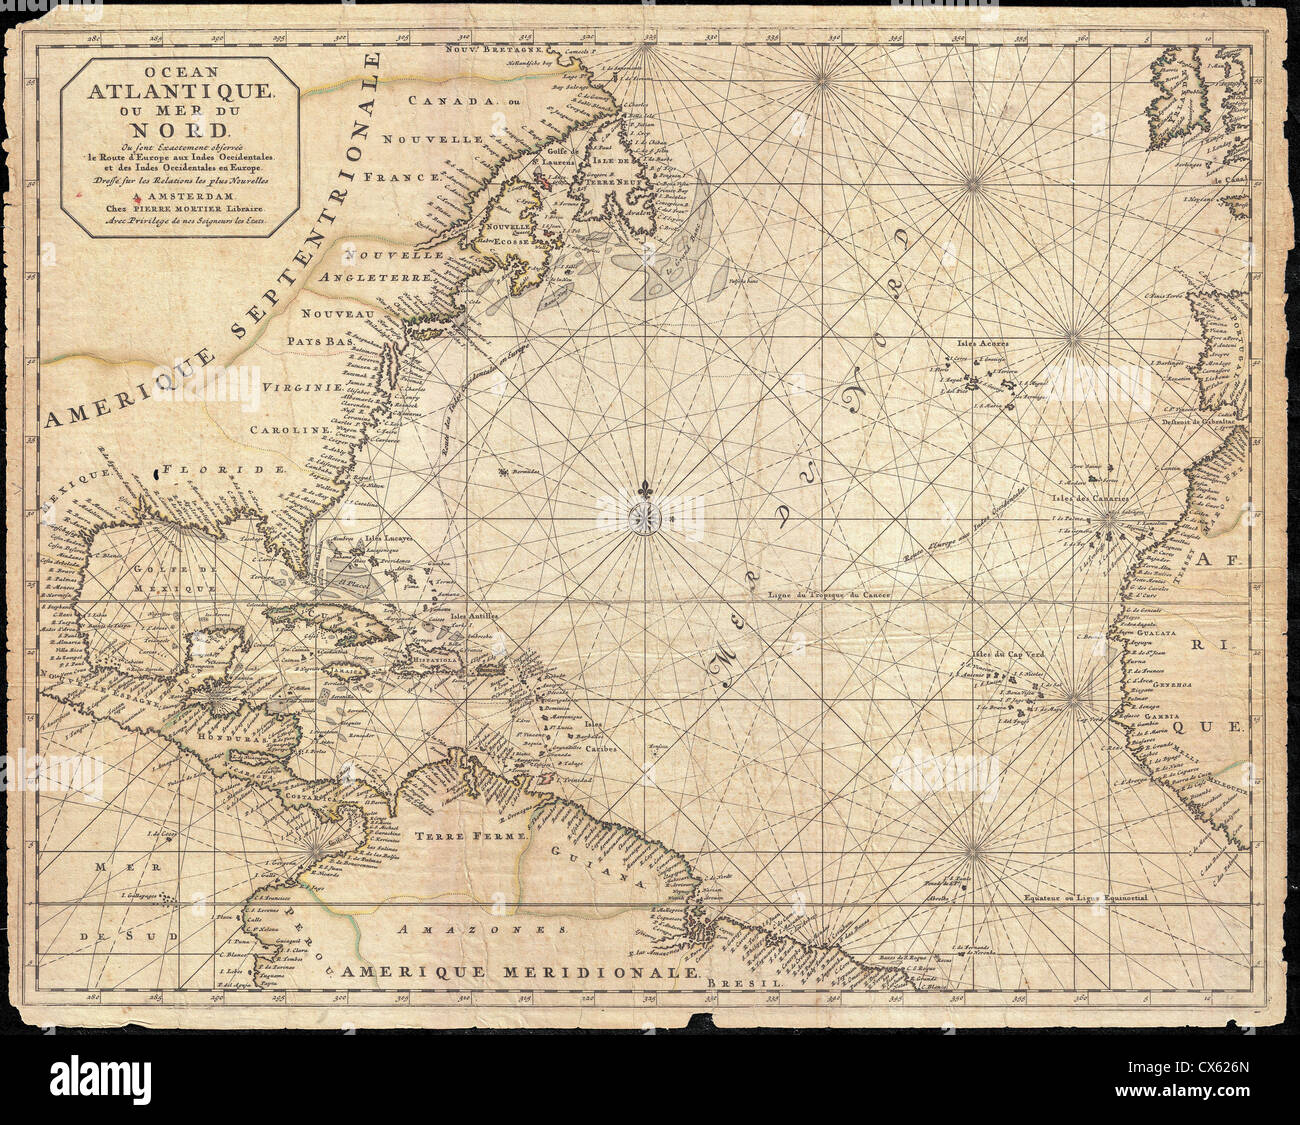 1683 Mortier Map of North America, the West Indies, and the Atlantic Ocean Stock Photo